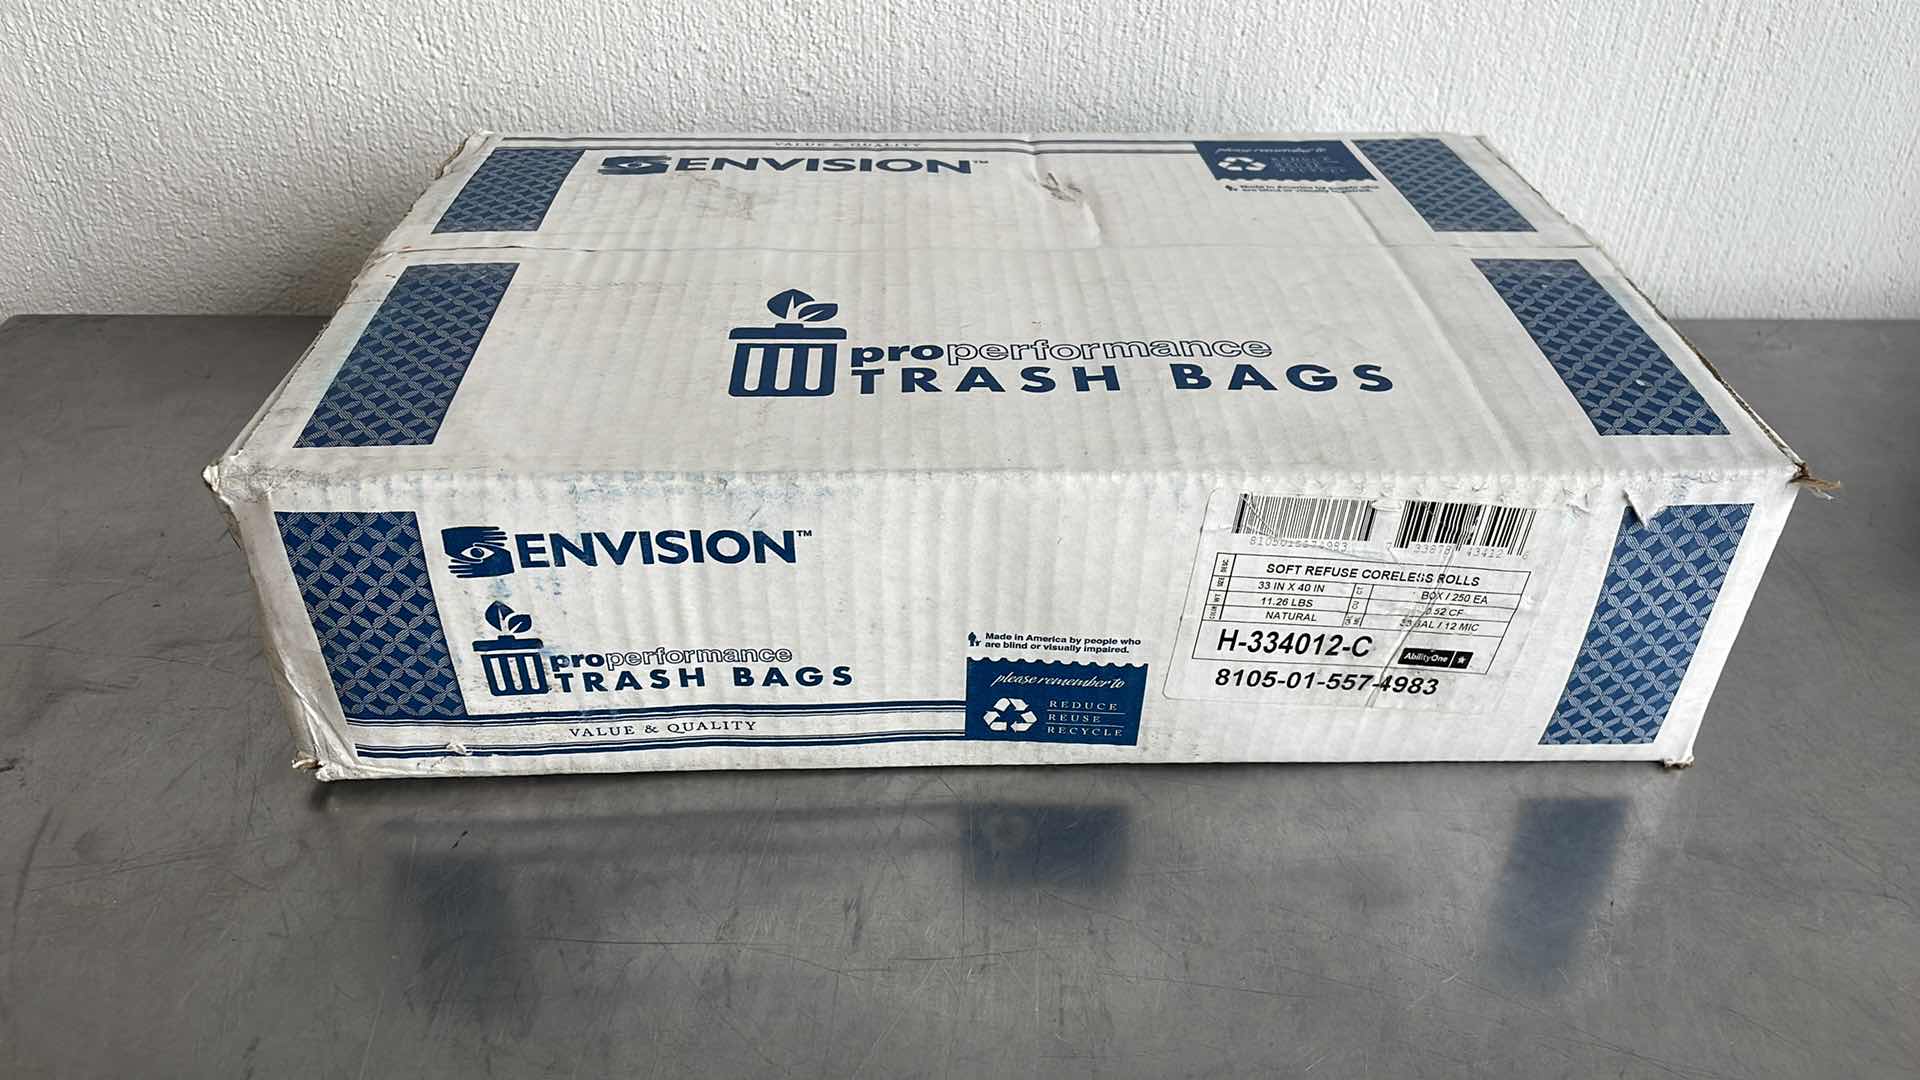 Photo 1 of ENVISION PROPERFORMANCE TRASH BAGS 33GAL 250CT